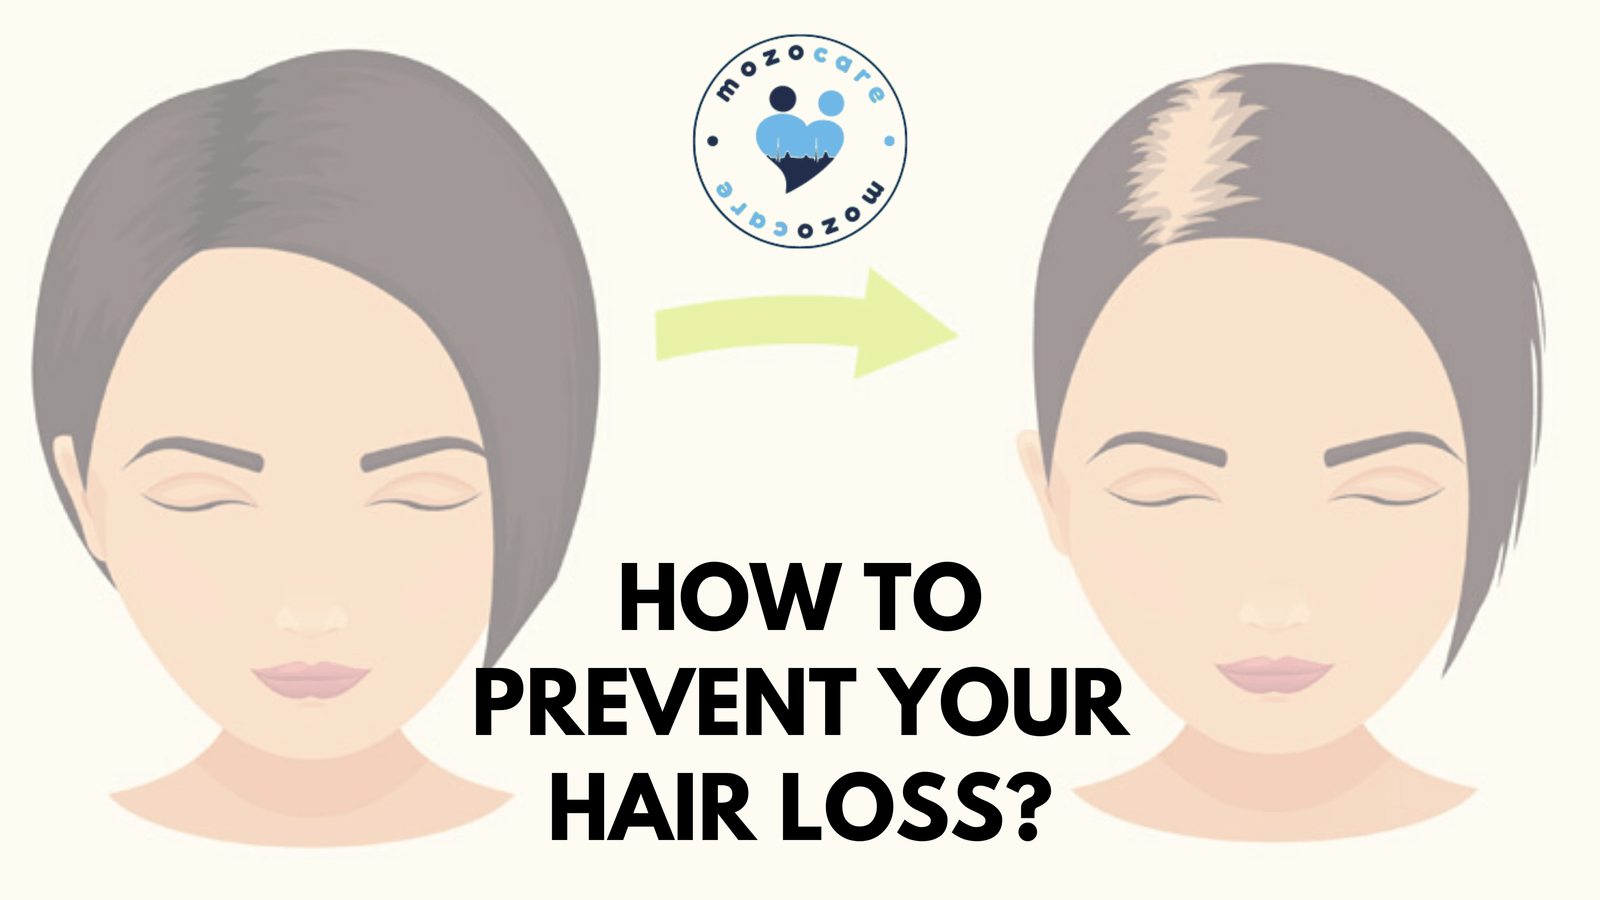 How To Prevent Your Hair Loss?